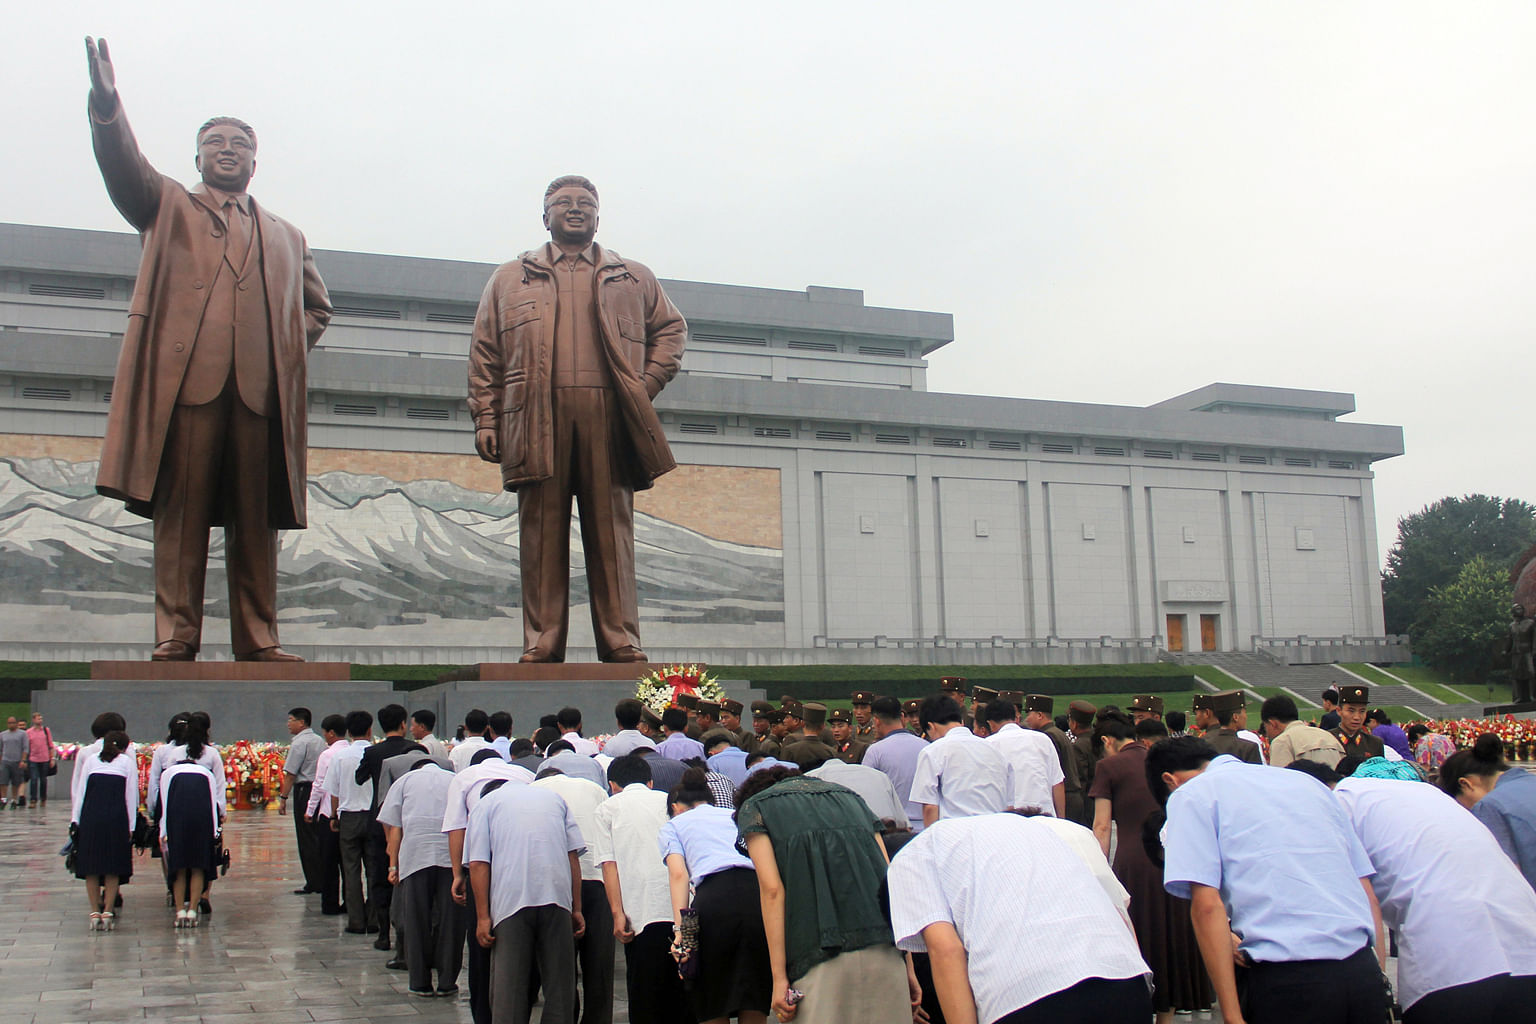 On Victory Day, university students perform mass dances at Kim Il Sung Square (above) while other North Koreans pay their respects at the towering bronze statues of late presidents Kim Il Sung and Kim Jong Il (left). Cycling is a popular way to get a